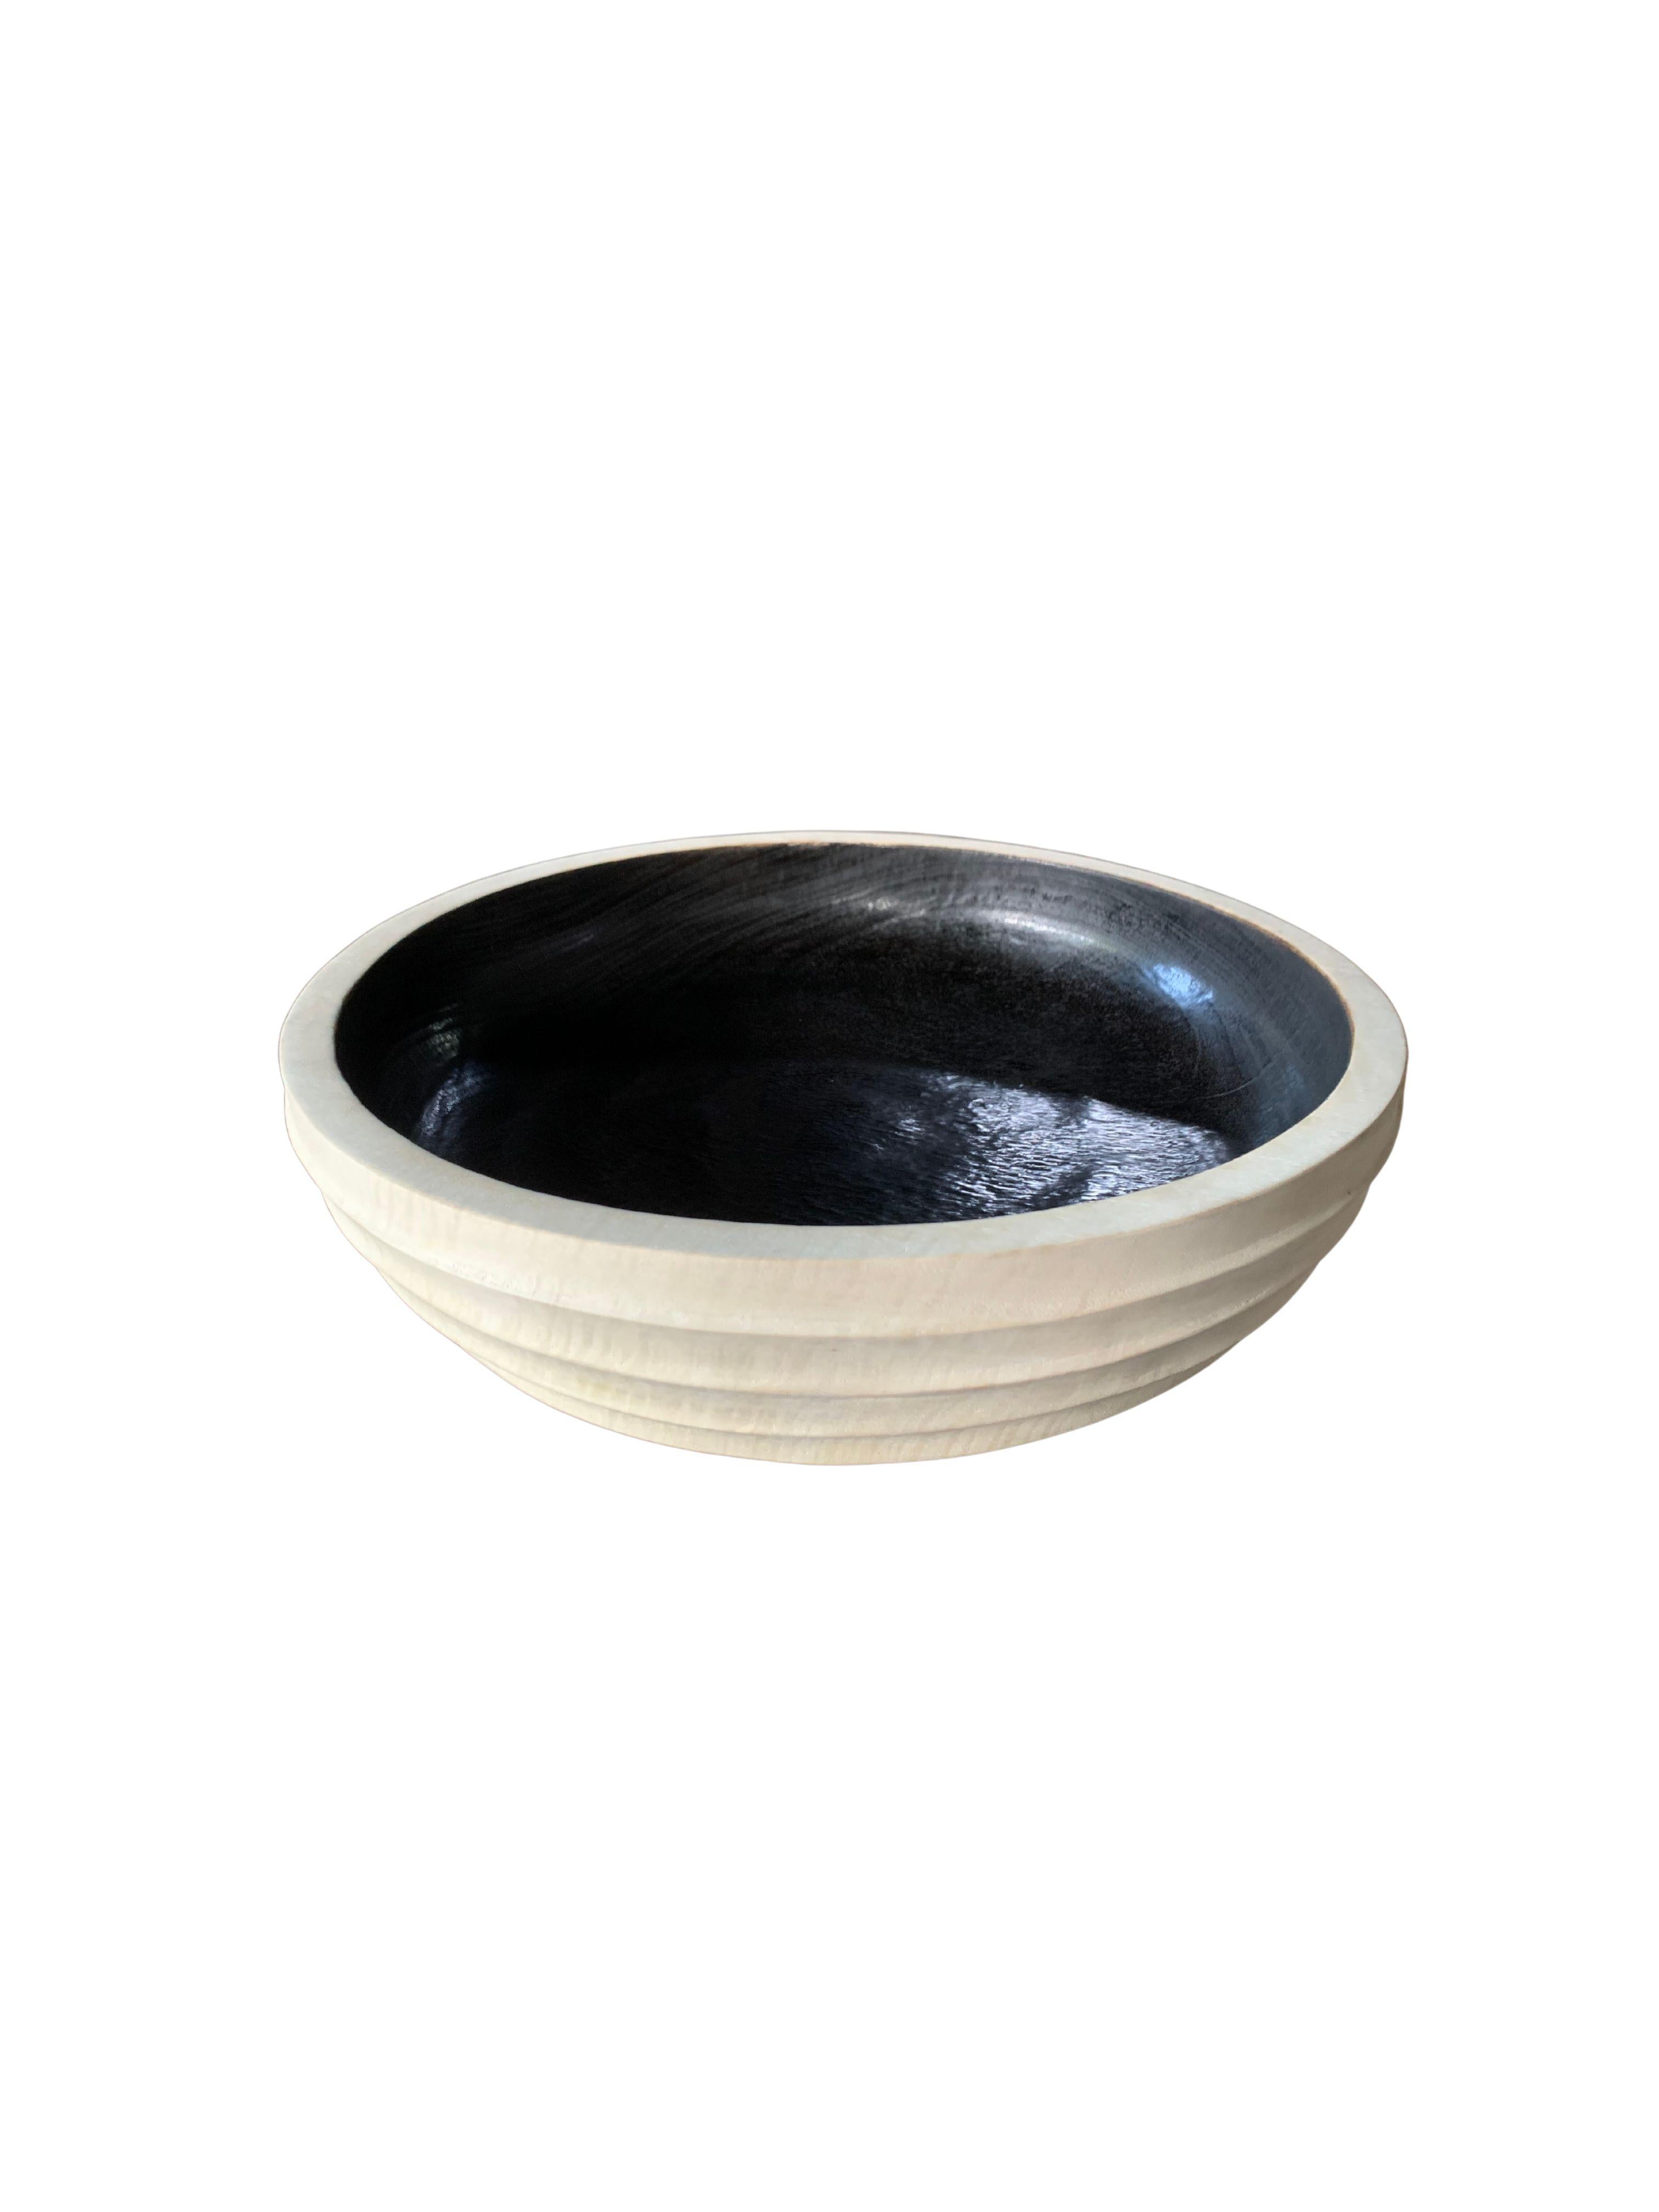 Organic Modern Solid Mango Wood Bowl with Bleached and Burnt Finish For Sale